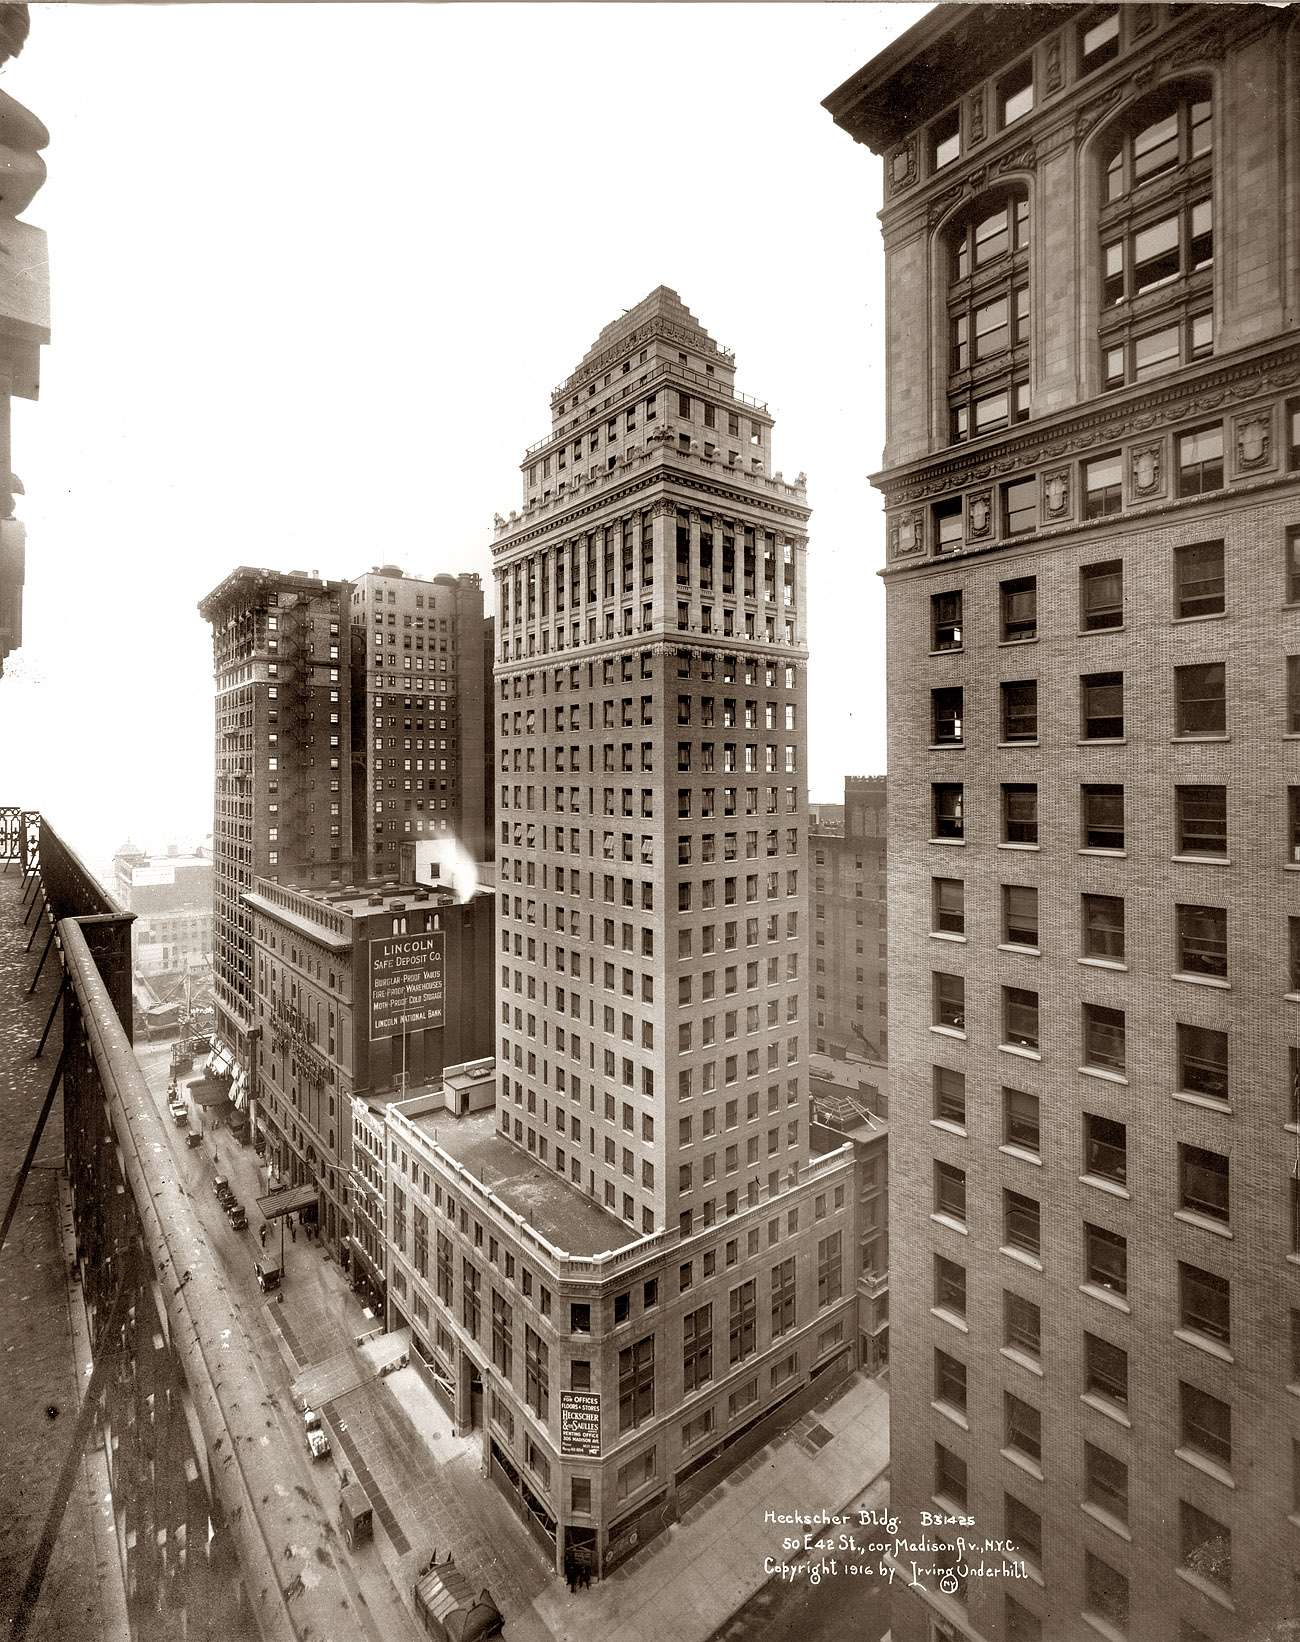 New York, 1916. Heckscher Building at 50 East 42nd Street and Madison Avenue. View full size. Irving Underhill photo. The building, which still stands, used to have a squash court on the 23rd floor. Nowadays it's dwarfed by its neighbors.